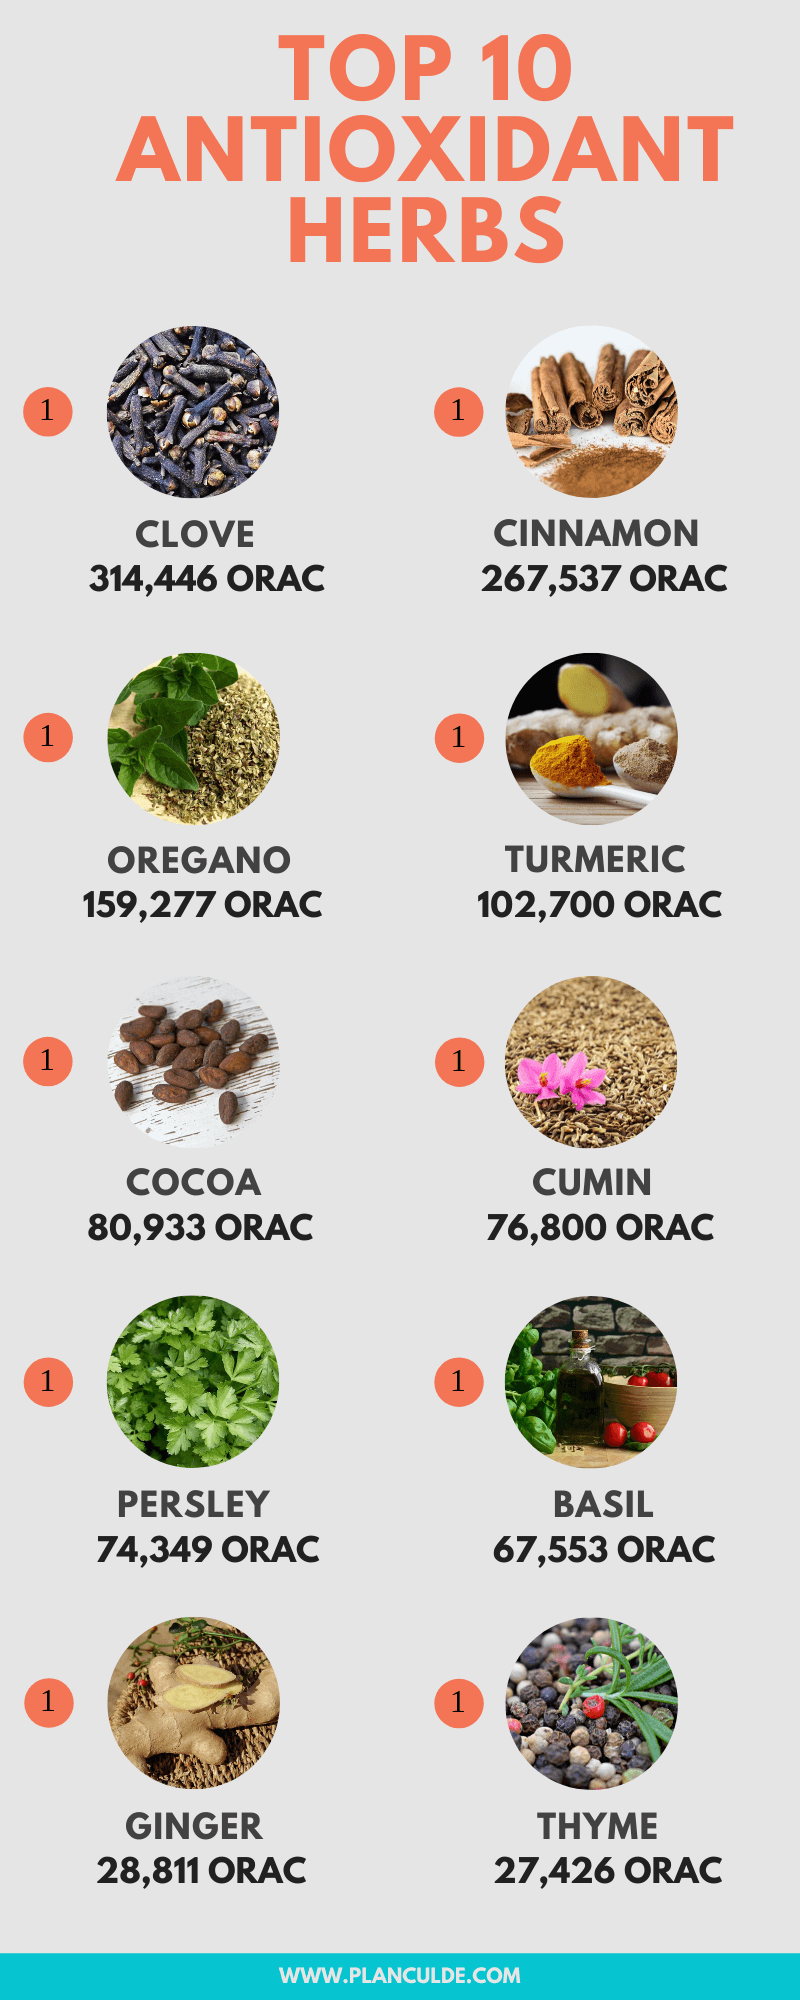 Antioxidant Foods: List of the Top 10 Antioxidant Foods and Herbs